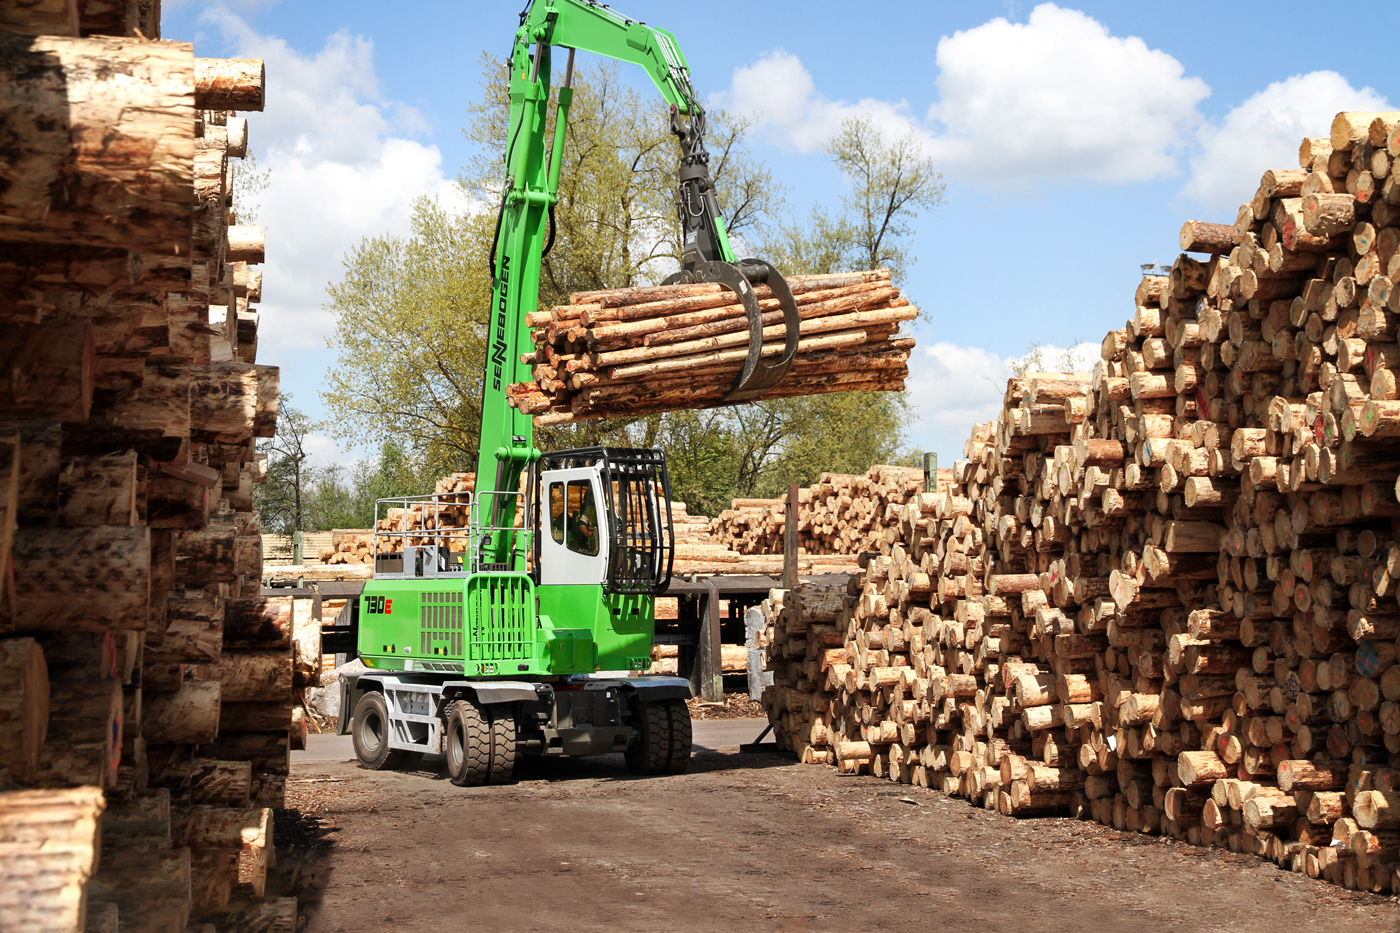 Timber handling in sawmills and at log yards: SENNEBOGEN 730 E material handler - loading logs and tree trunks